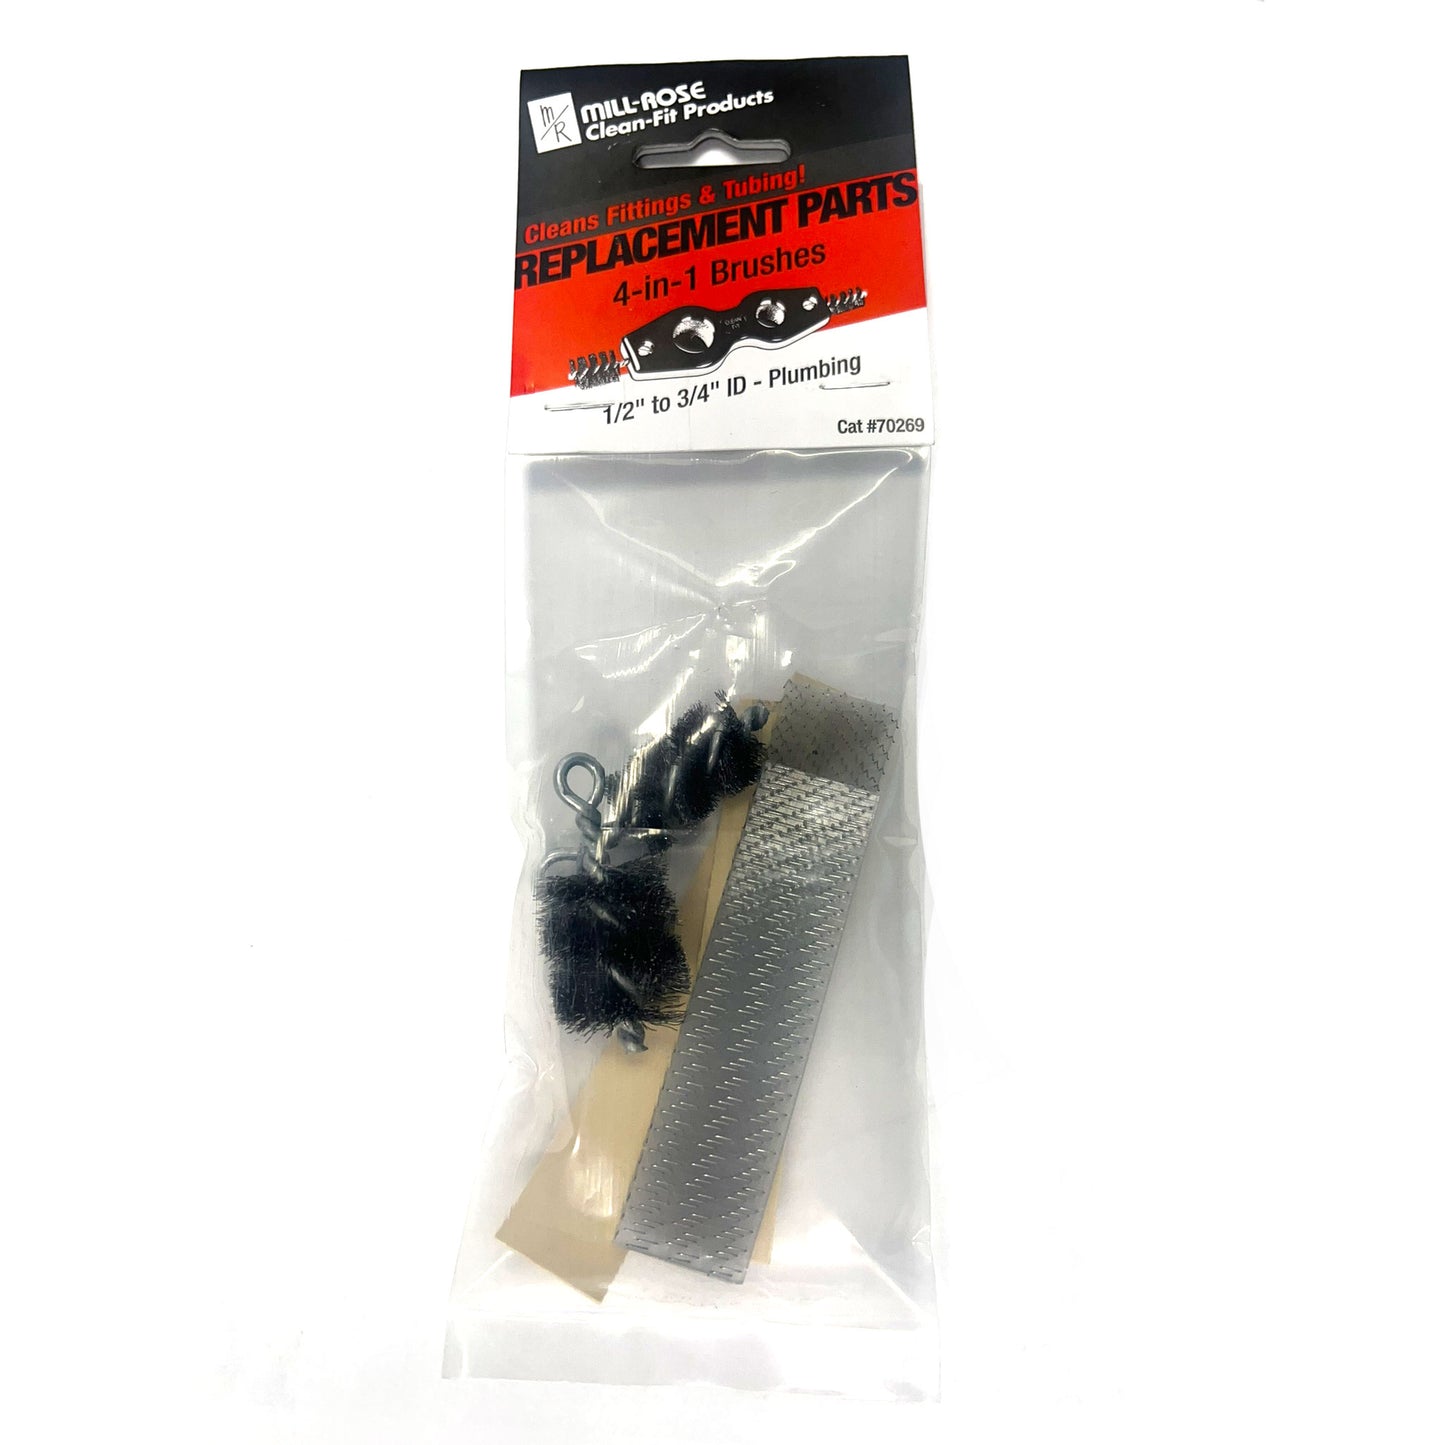 70269 - Replacement Parts for 4-in-1 Fitting & Tube Cleaning Brush